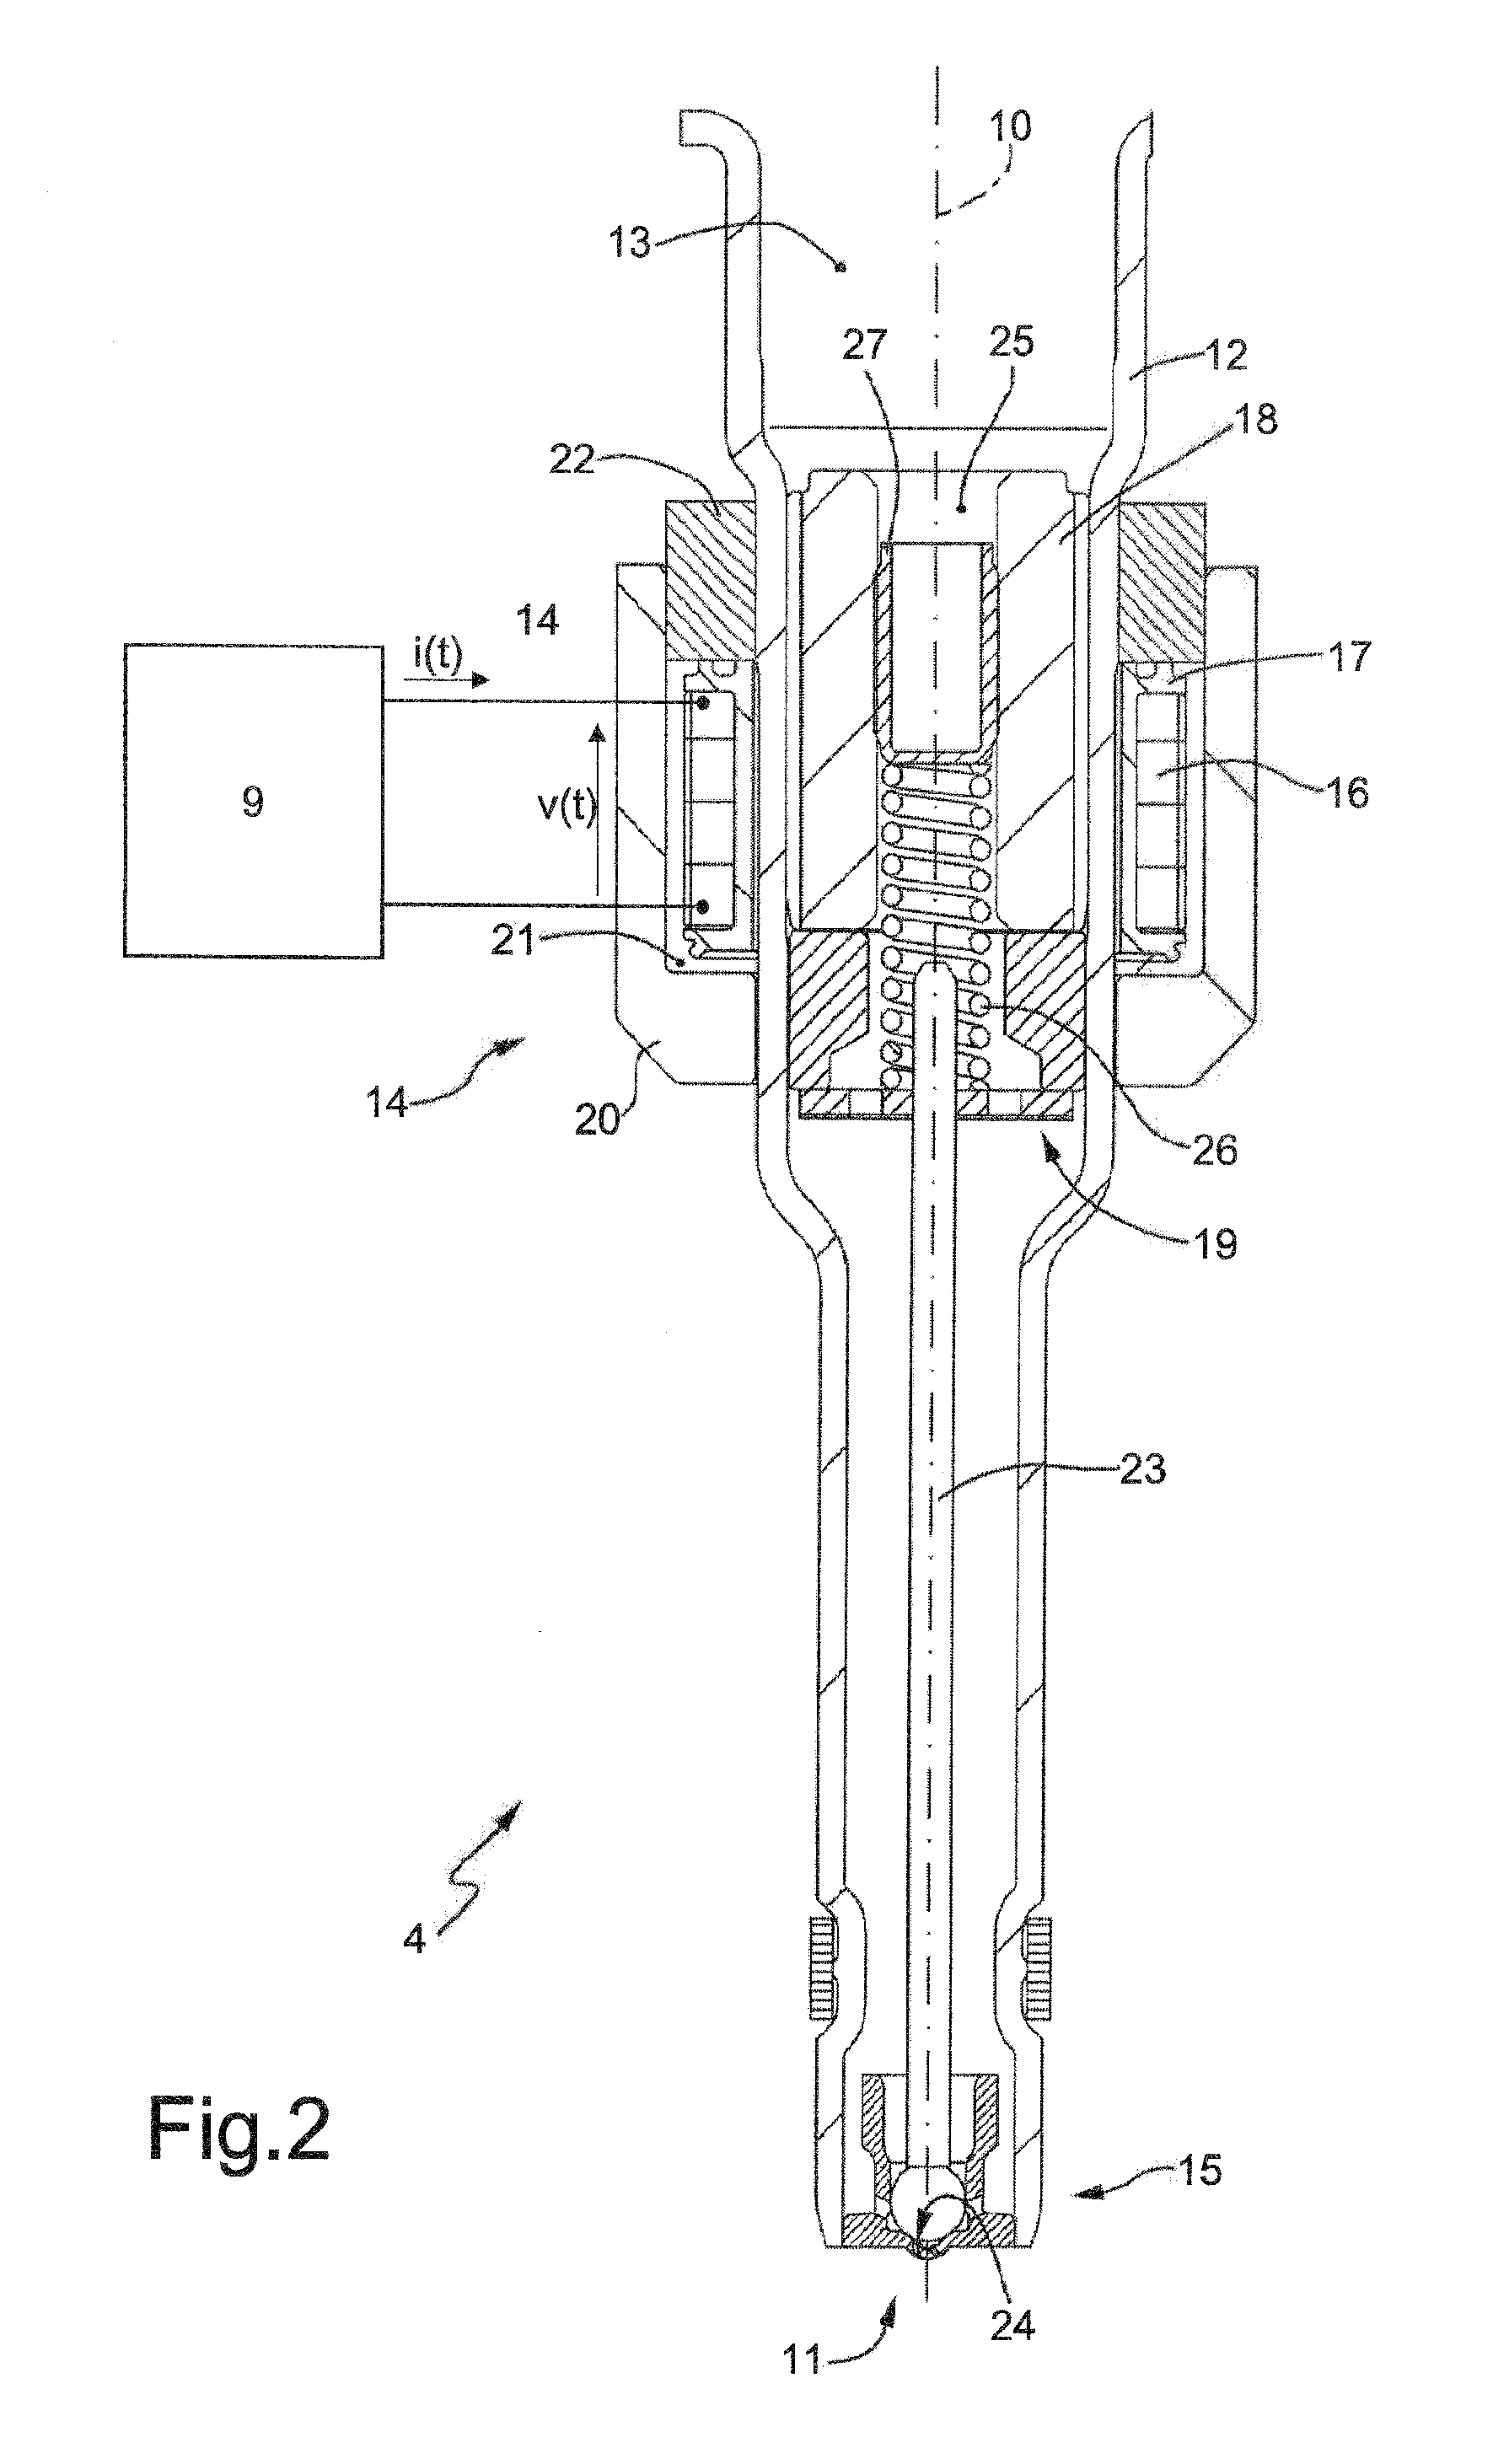 Method of controlling an electromagnetic fuel injector